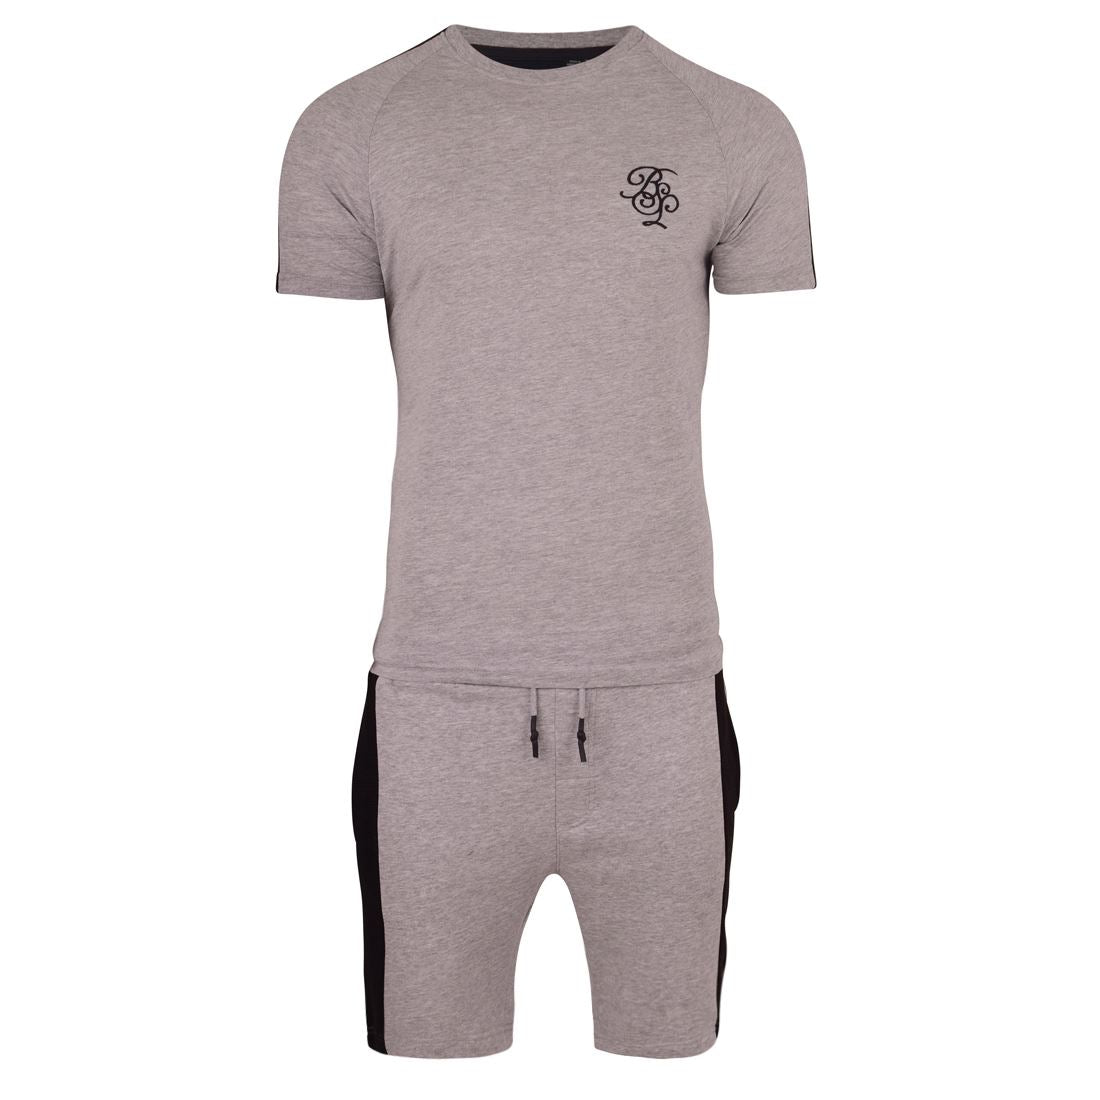 Mens Cotton T Shirt Fleece Shorts Set Summer Tracksuit Gym Holiday Outfit